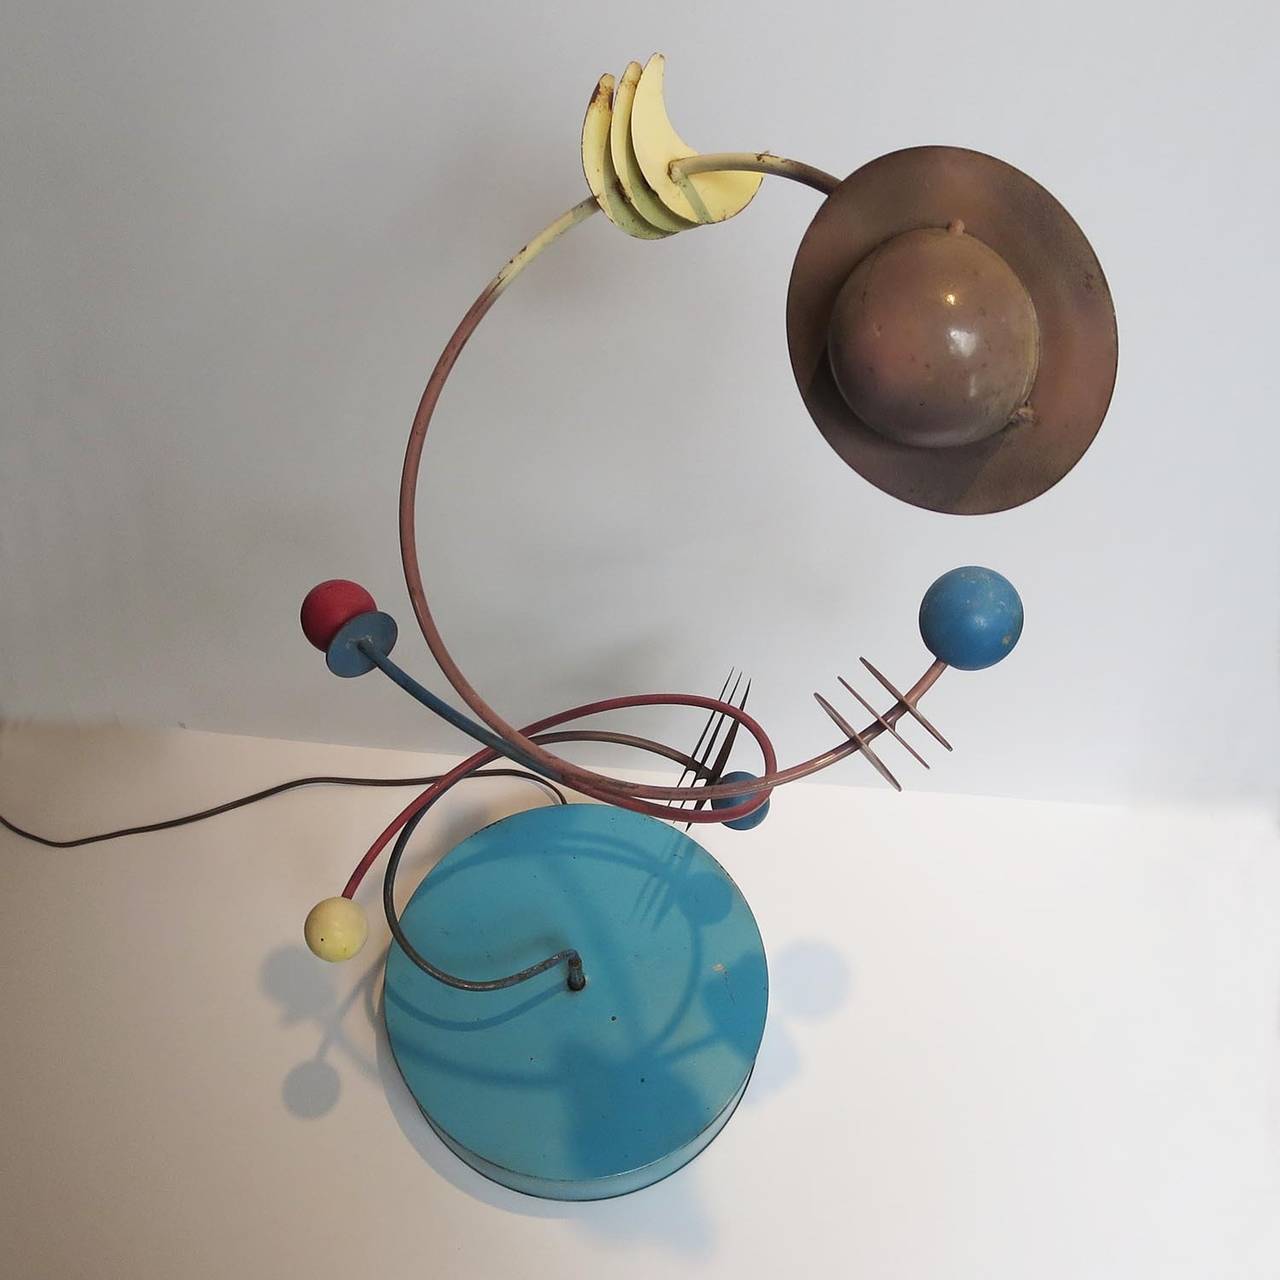 I have had many artistic and decorative items by Jere over the years, but nothing quite as unique as this! The sculpture represents a celestial grouping of planets and moons, created in painted wood and steel. The entire sculpture slowly revolves